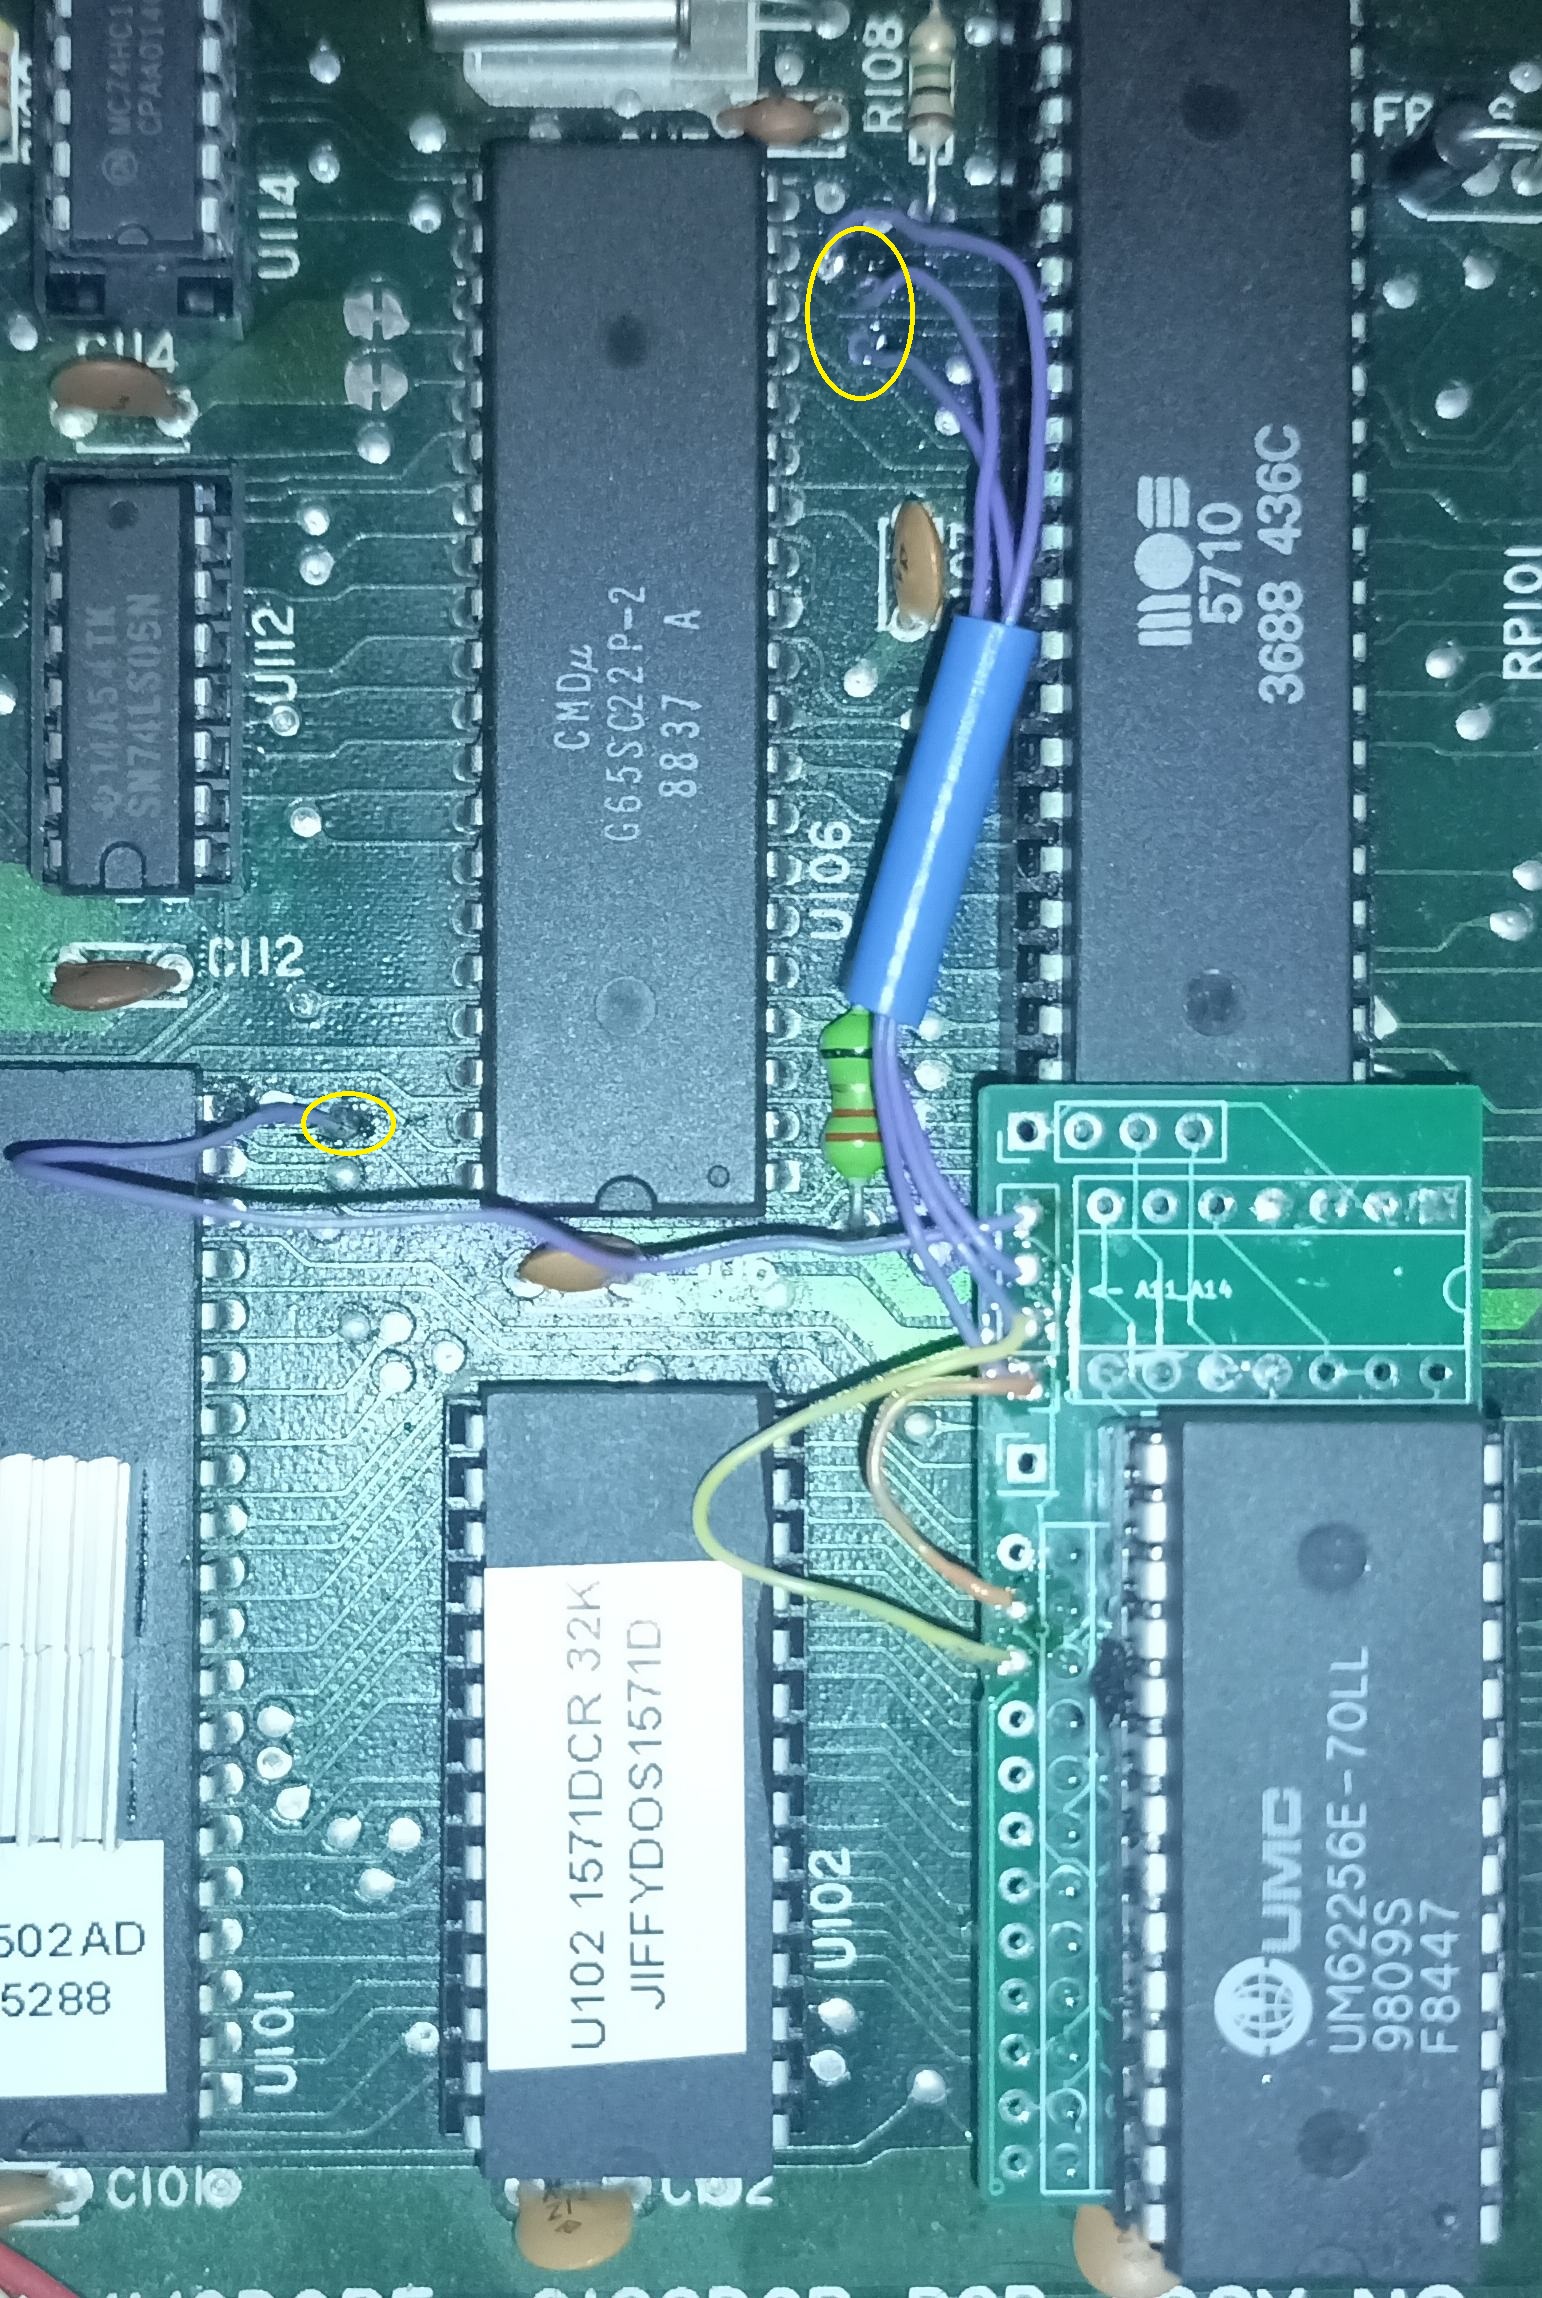 C128DCR with A11-A14 vias connected and marked